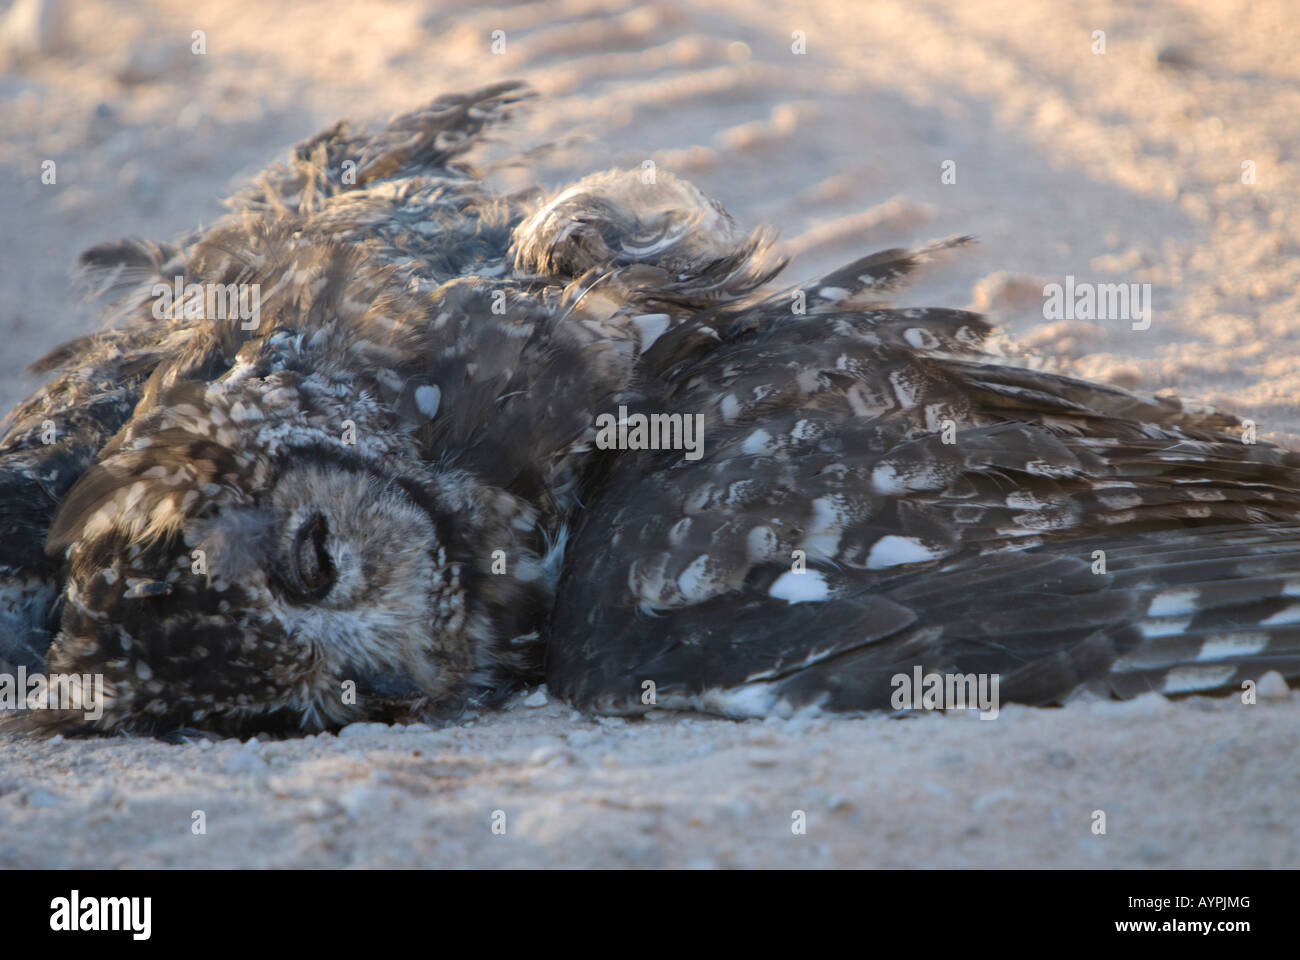 A dead owl lying on a dirt road in the Kalahari Stock Photo